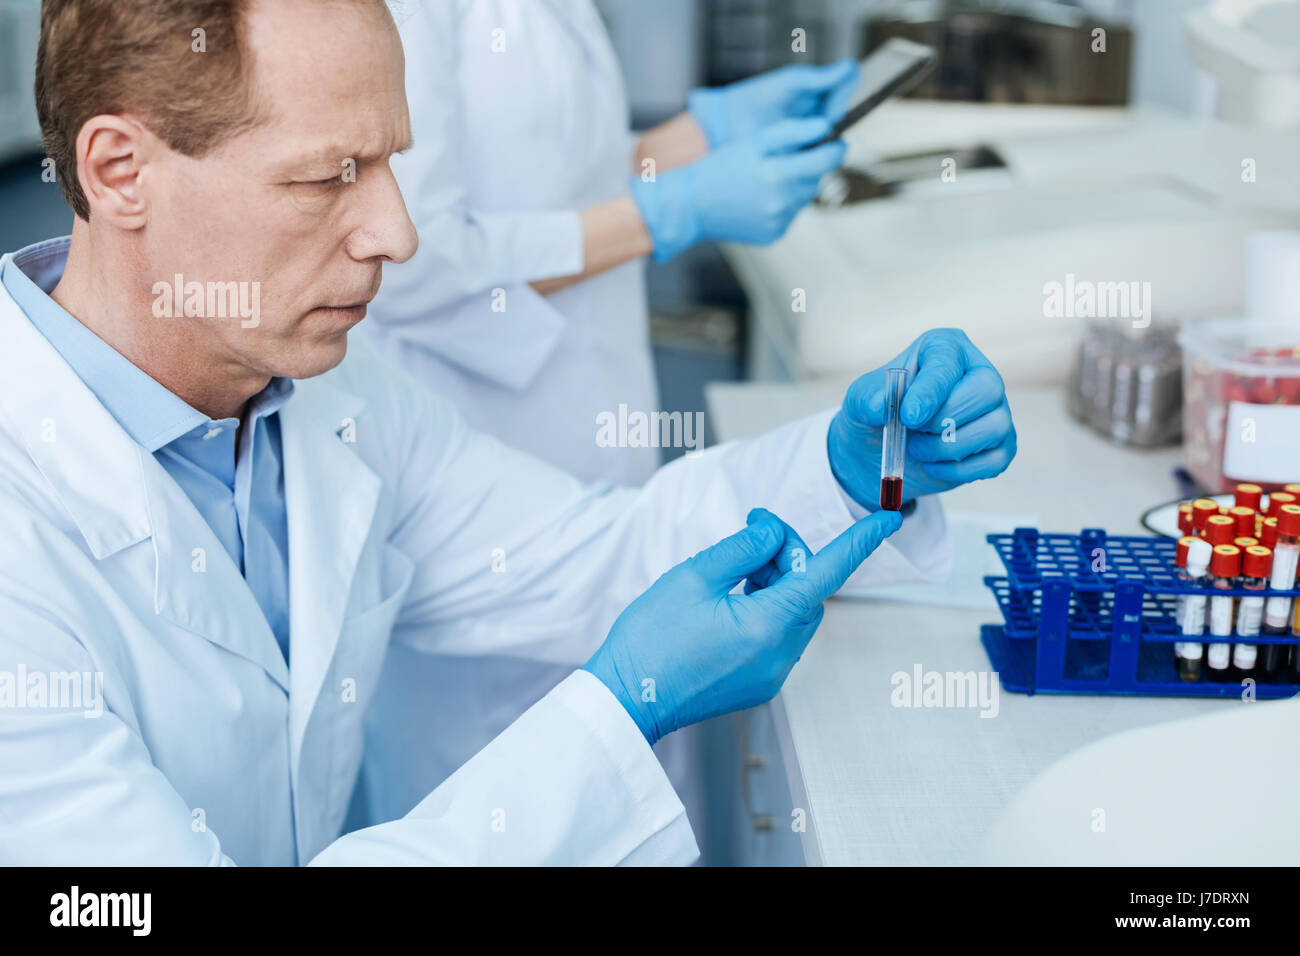 Portrait of serious scientist while looking attentively at test tube Stock Photo